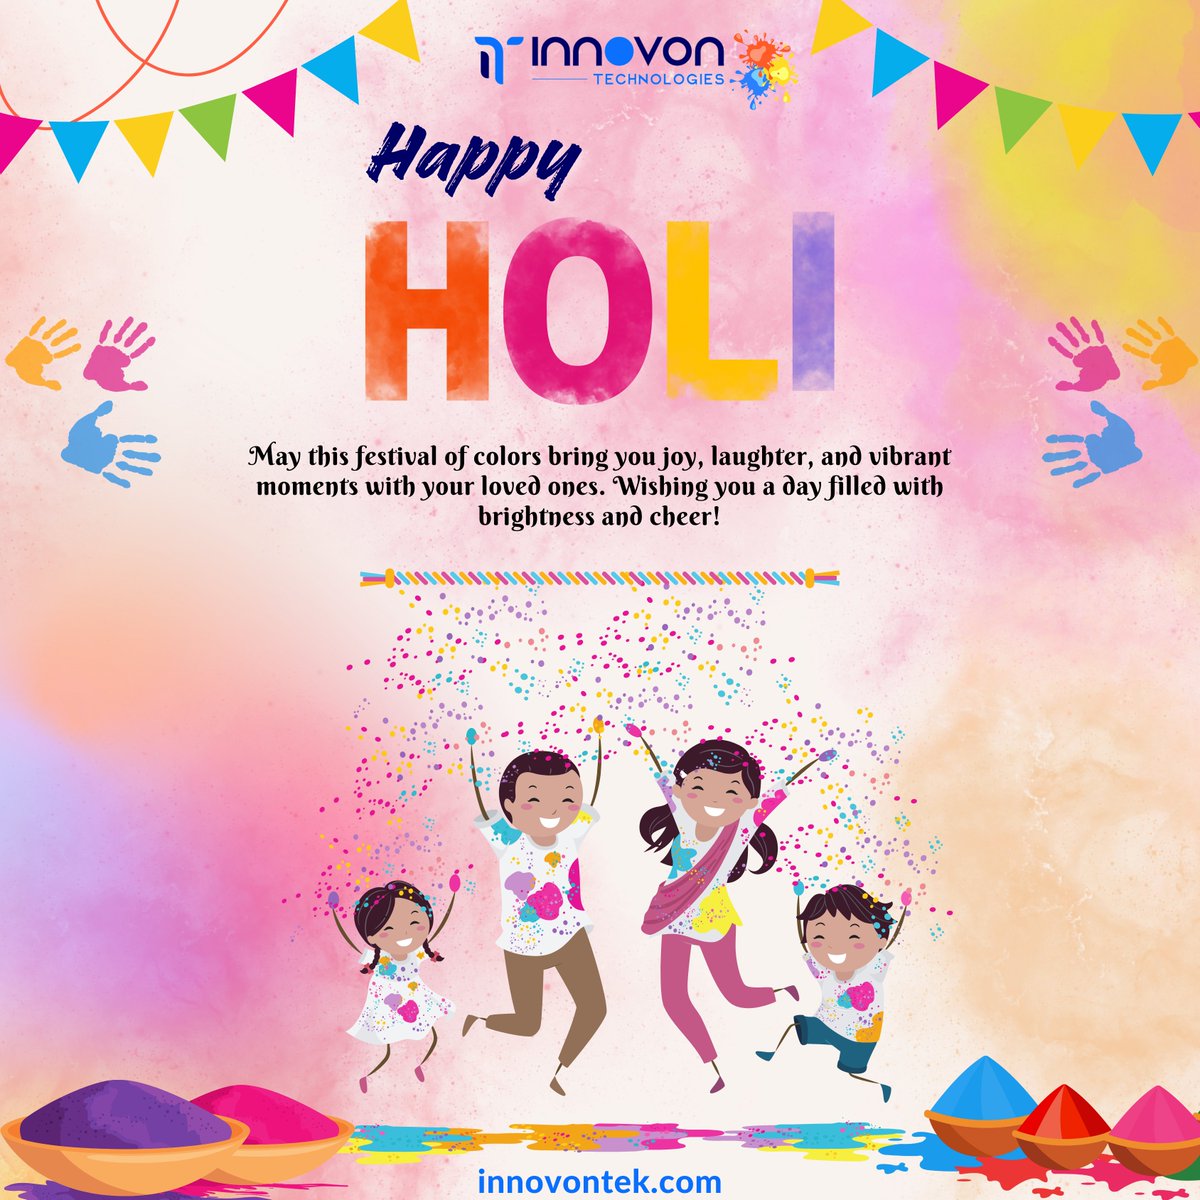 Happy Holi from Innovon Technologies! 🎨 May the hues of joy and laughter paint your day with warmth and happiness.🌈 

#innovon #innovontech #digitaltransformation #happyholi #innovontechnologies #huesofjoy #laughterpaints #warmthandhappiness #spiritoftogetherness #innovation